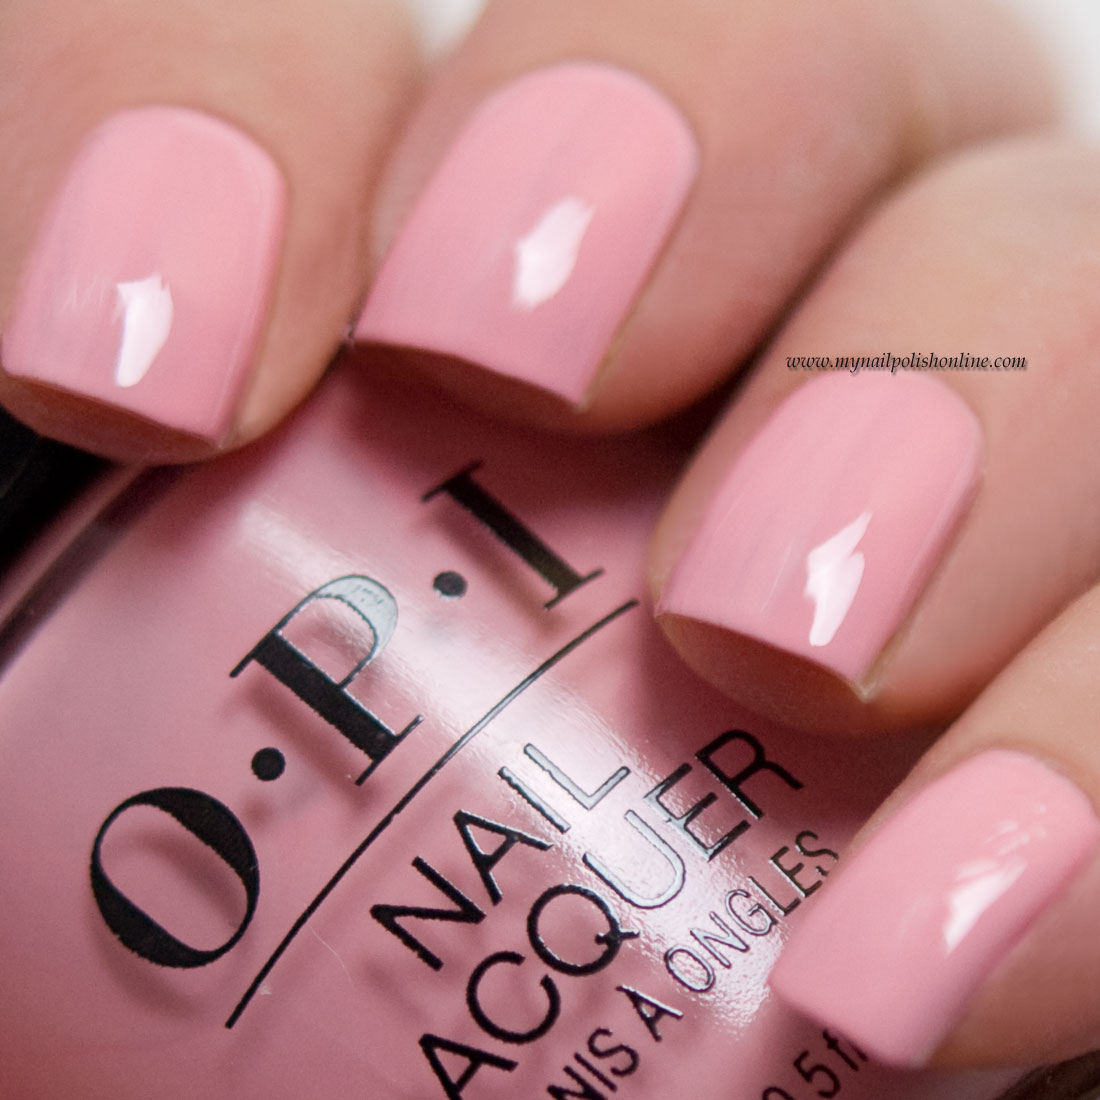 OPI Tagus in that selfie - My Nail Polish Online